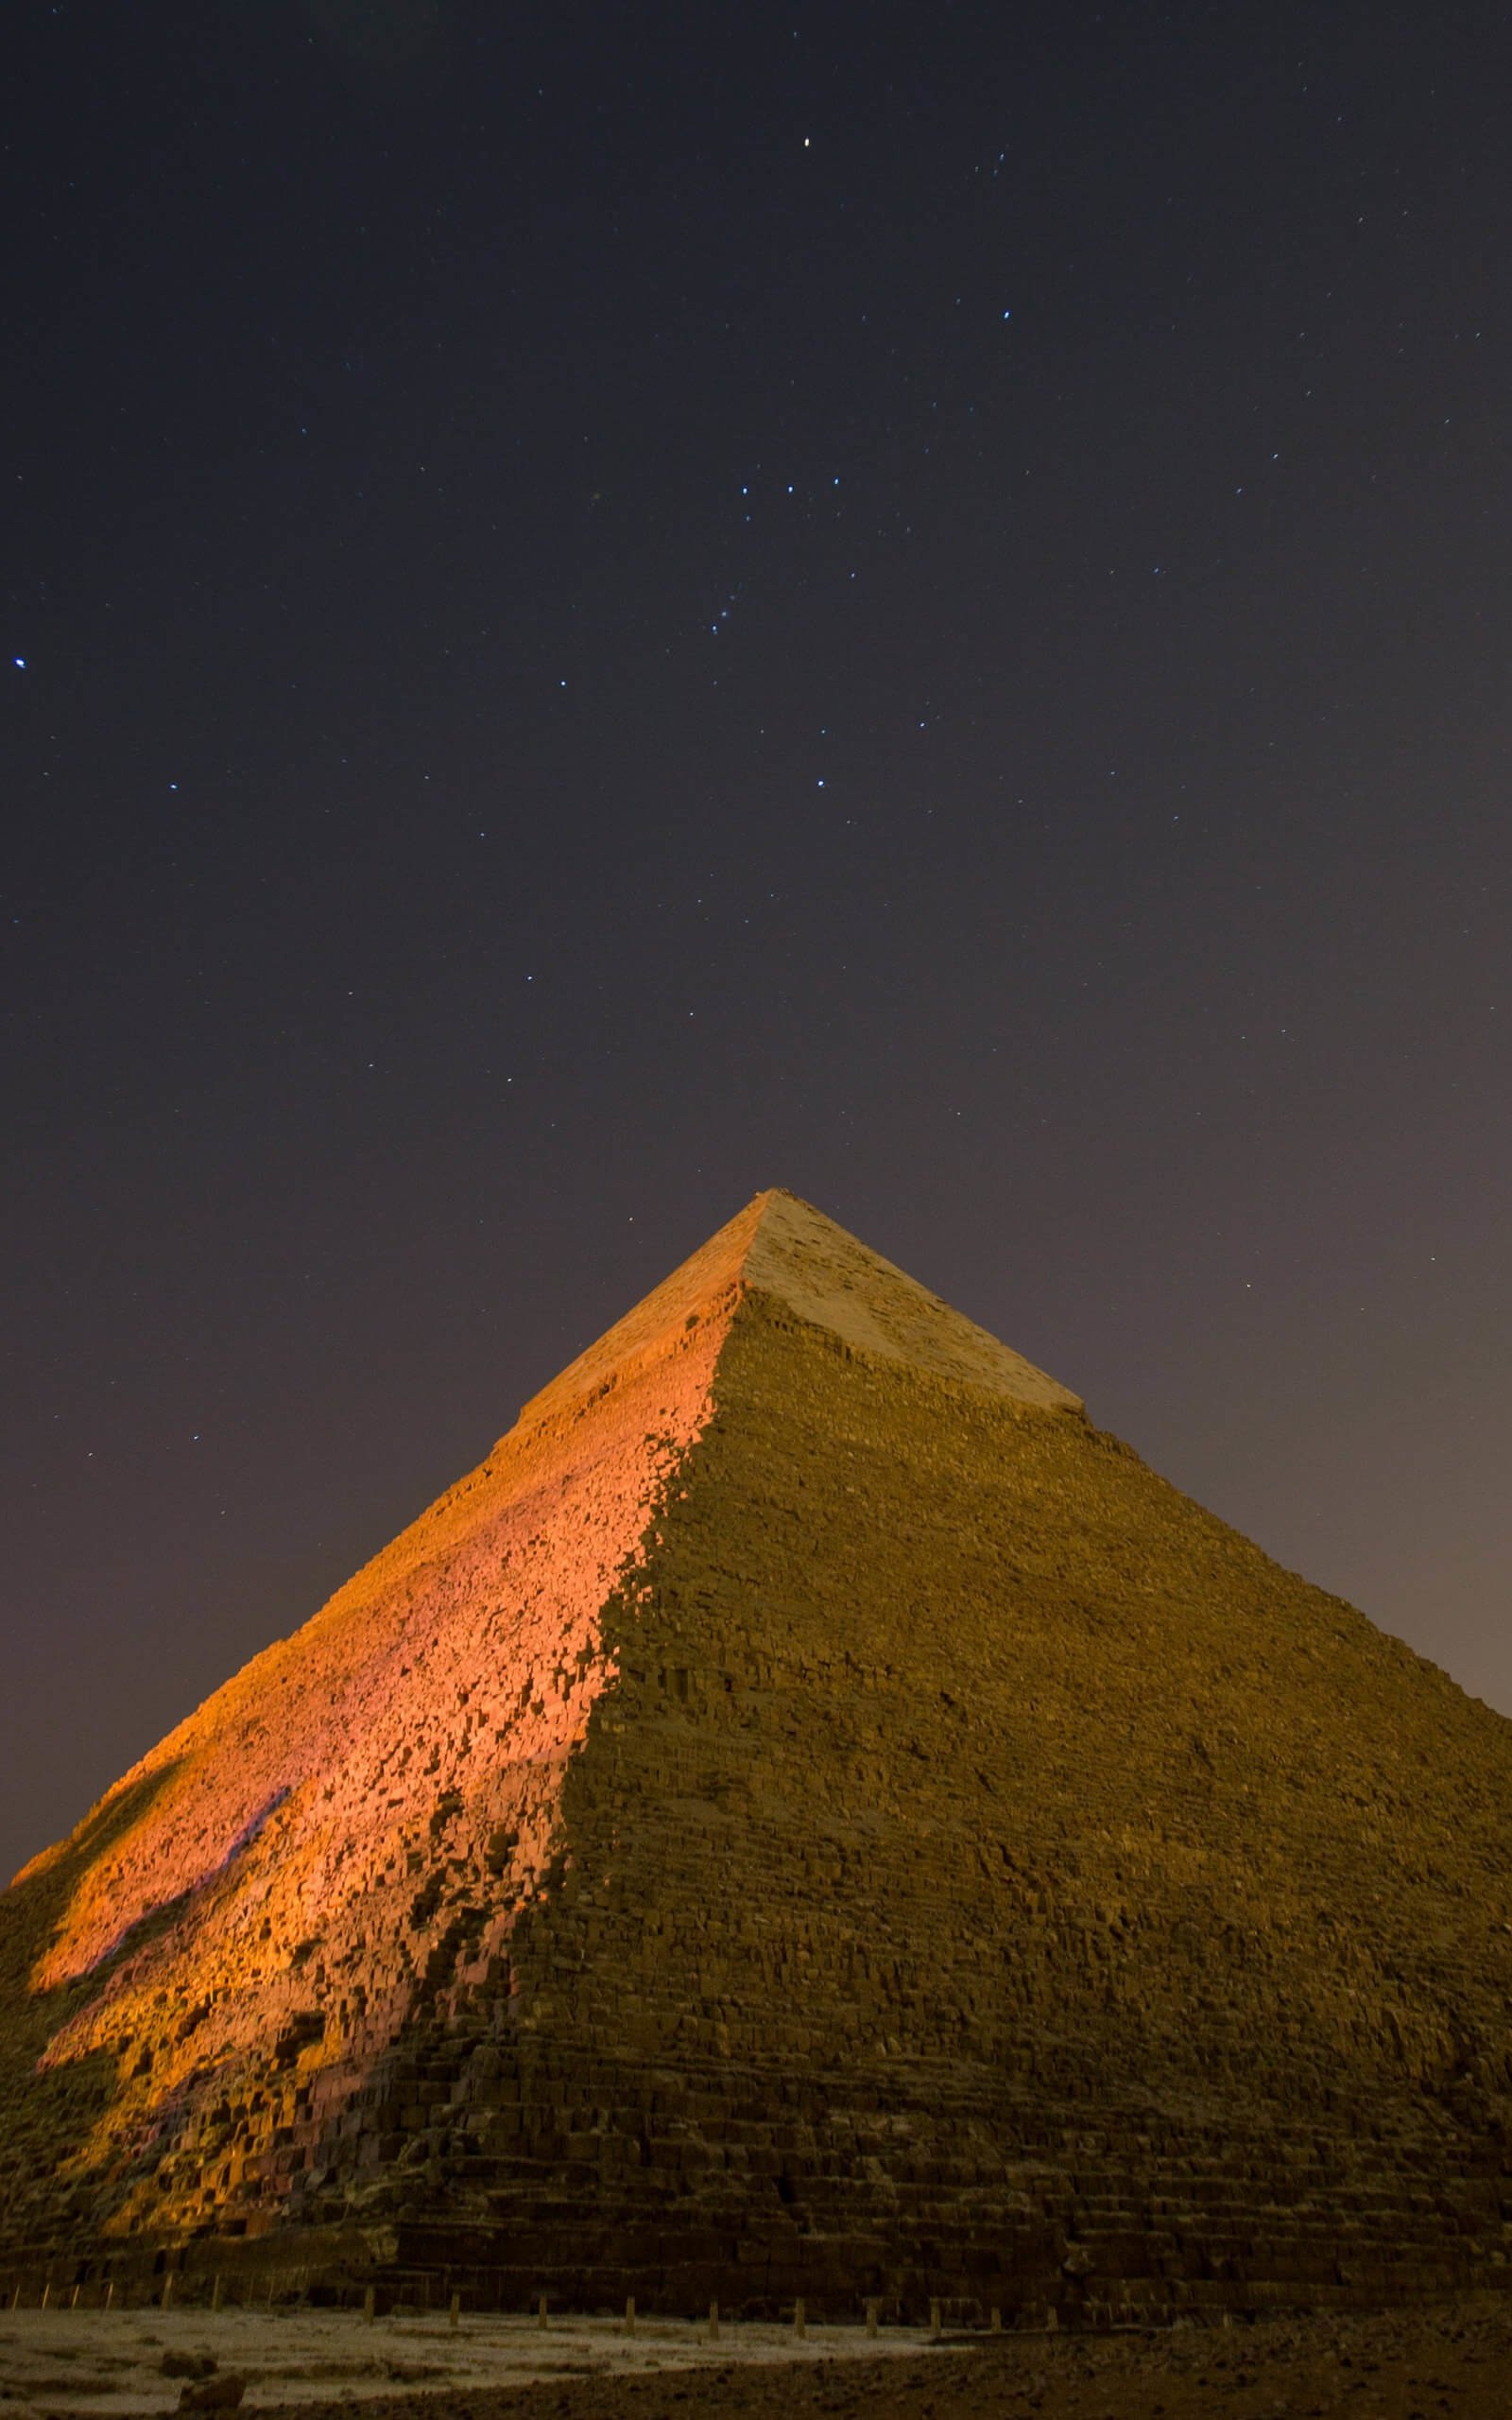 Pyramid by Night Wallpaper for Amazon Kindle Fire HDX 8.9